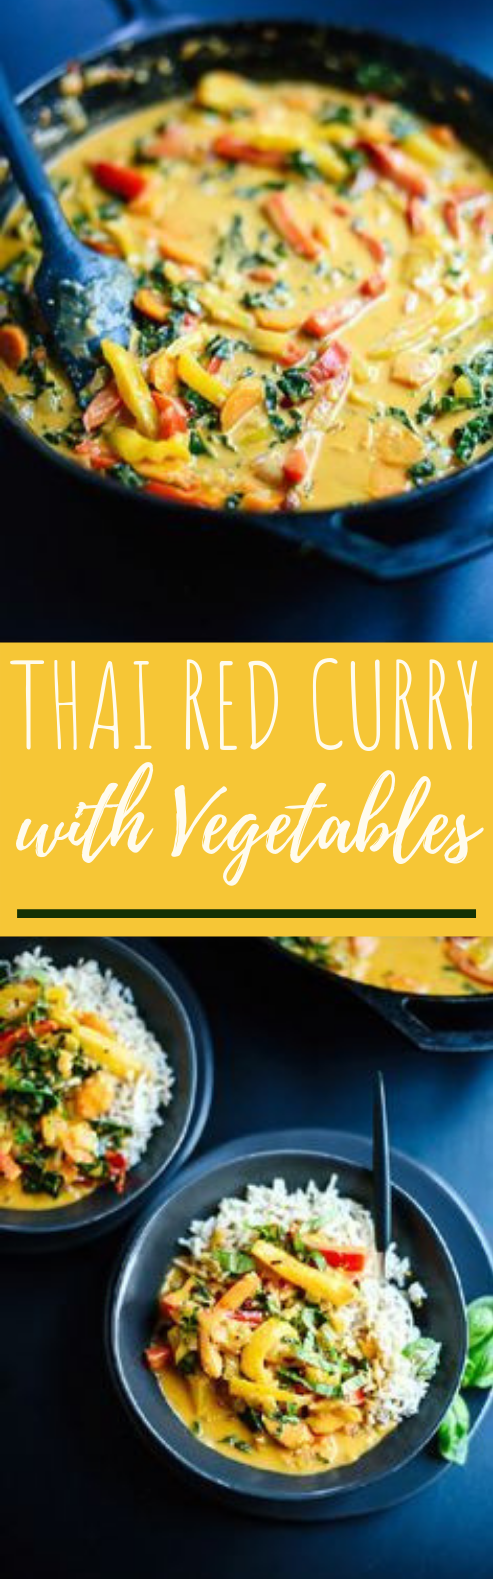 Thai Red Curry with Vegetables #curry #vegetarian